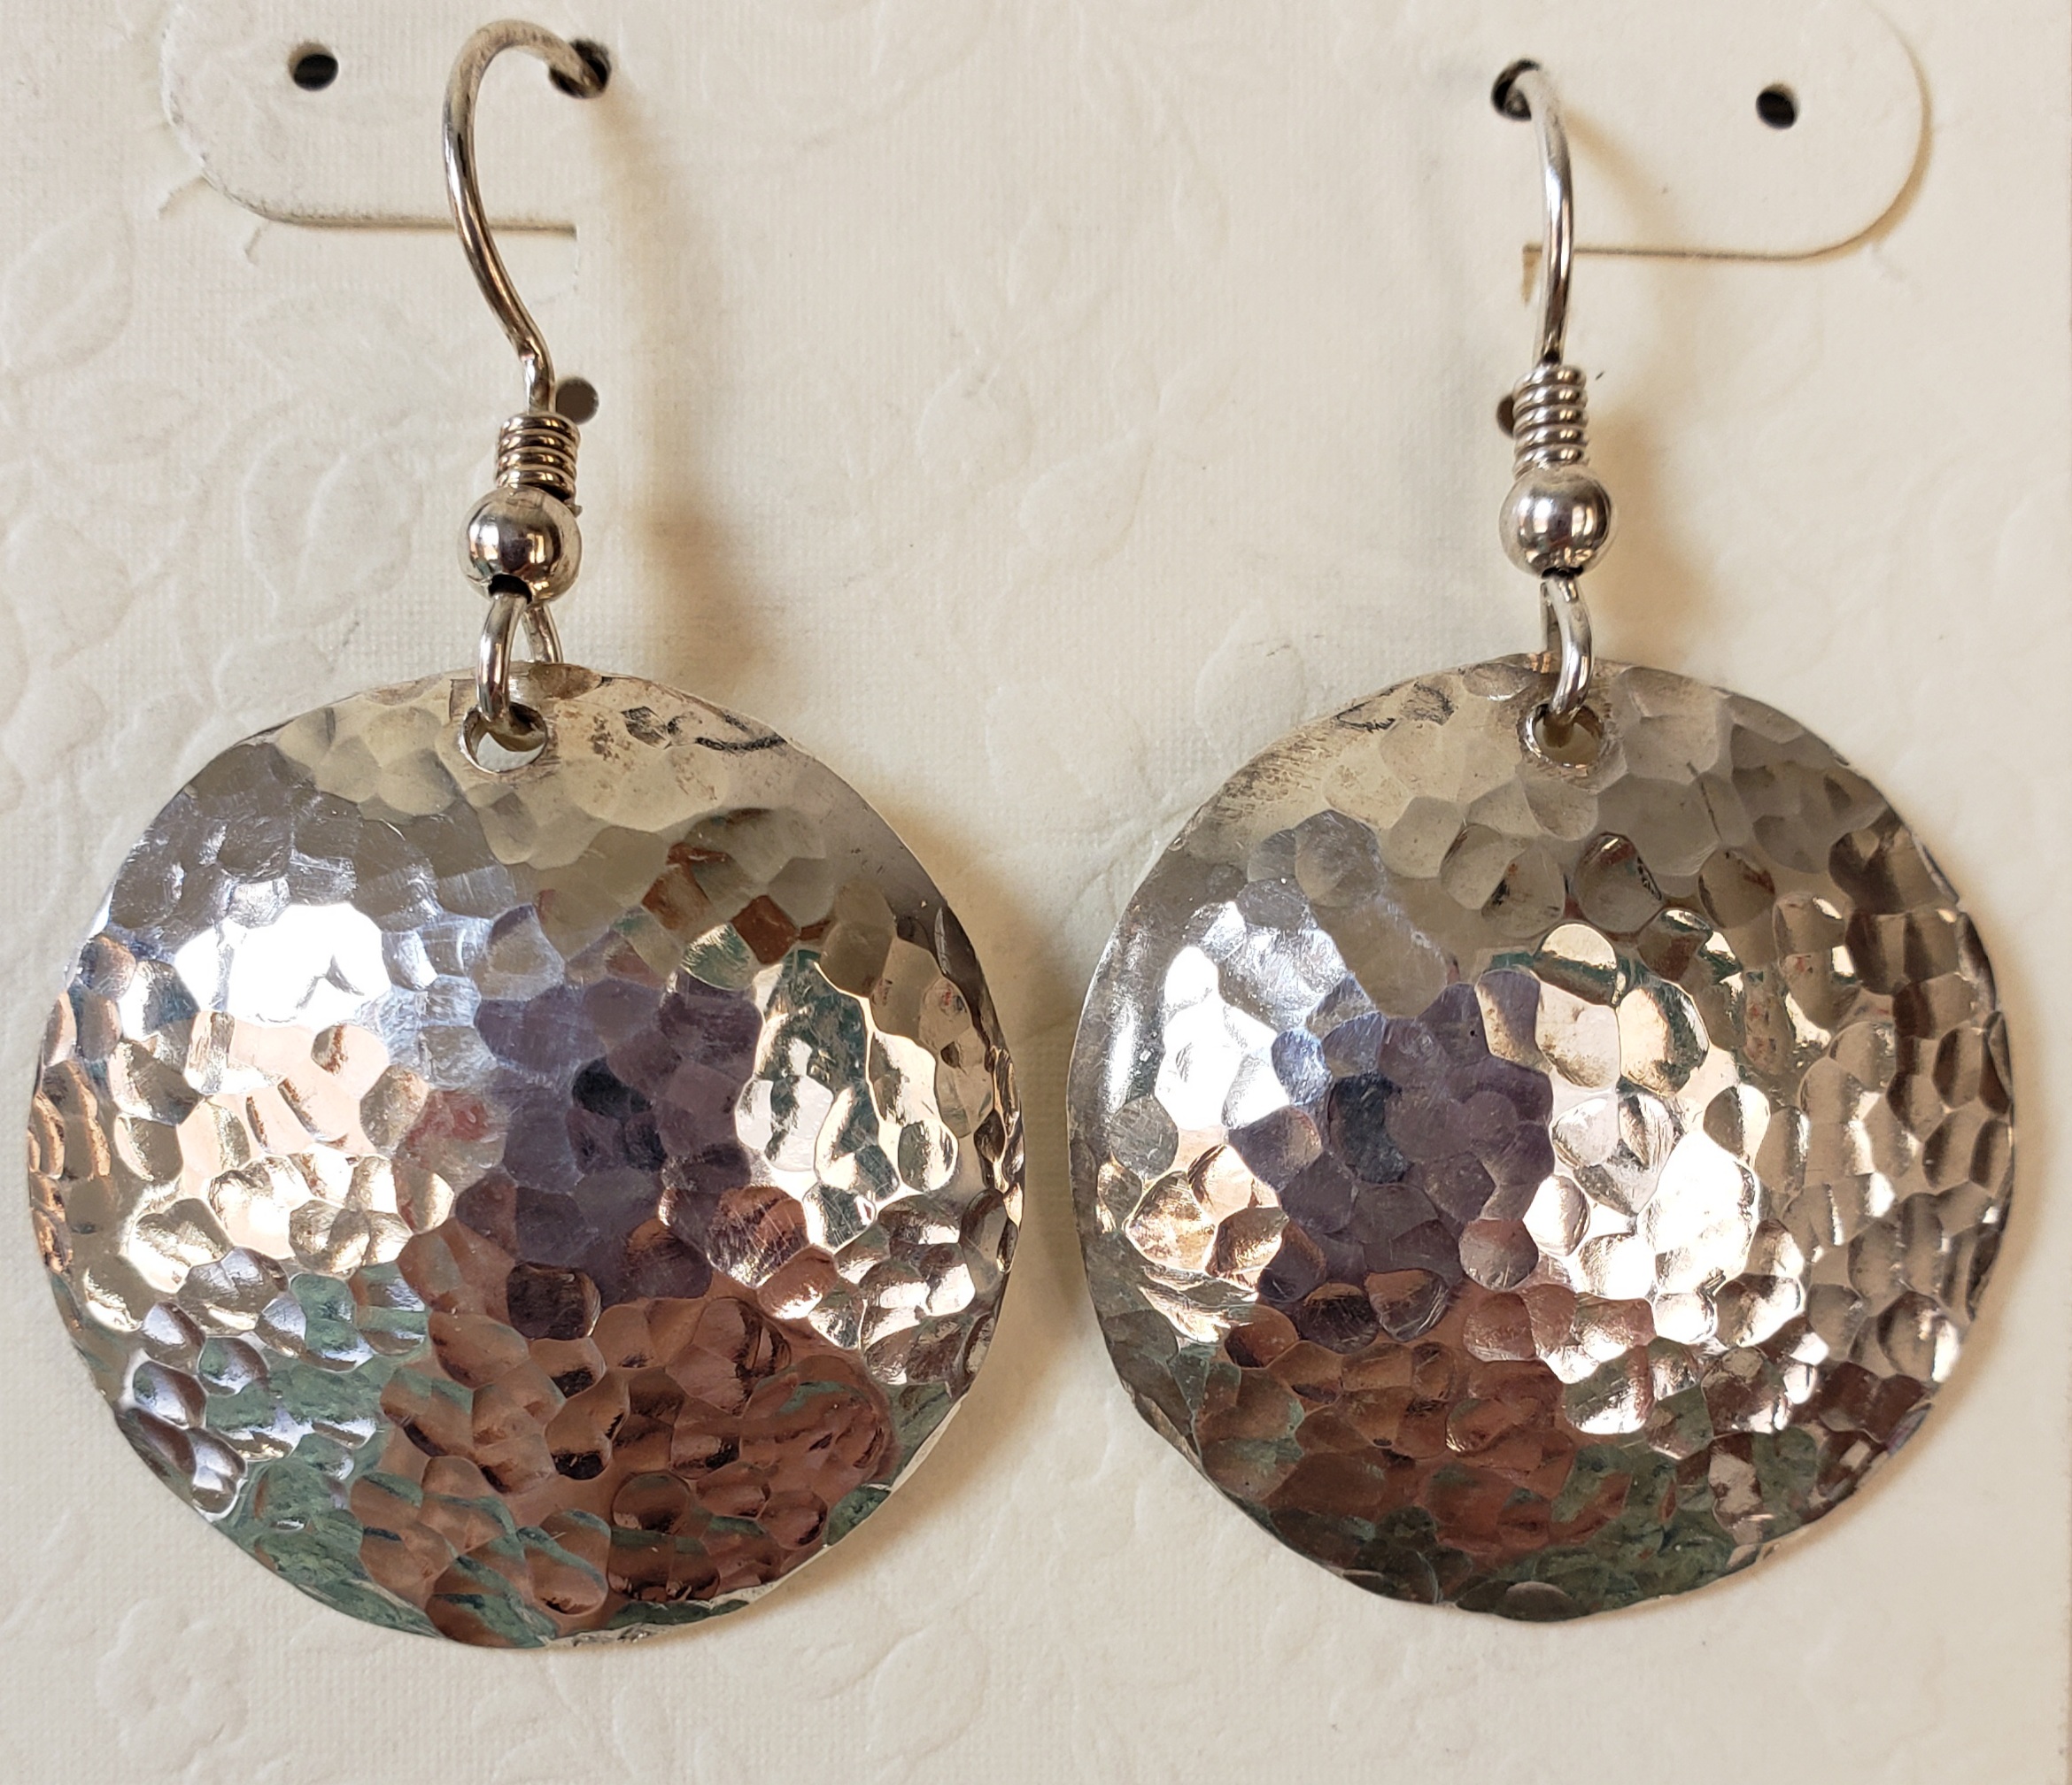 hammered sterling silver disk earrings handcrafted in the USA